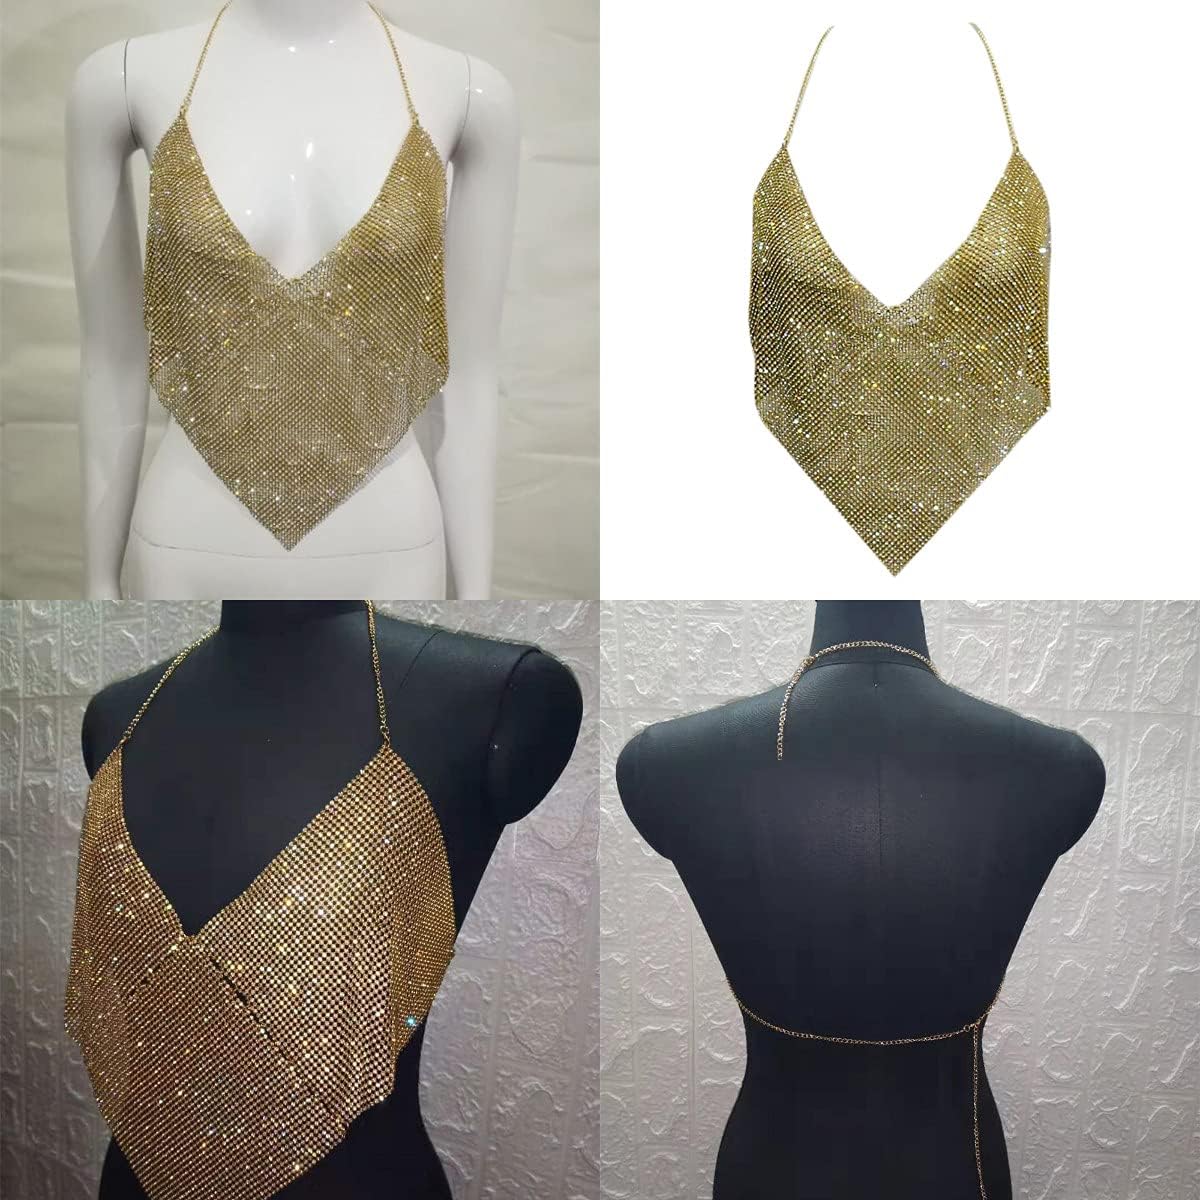 Women Sexy Shiny Rhinestone Tank Top Deep V Neck Halter Metal Body Chain Crop Top Shirt for Night Club Party Rave Outfit Gold